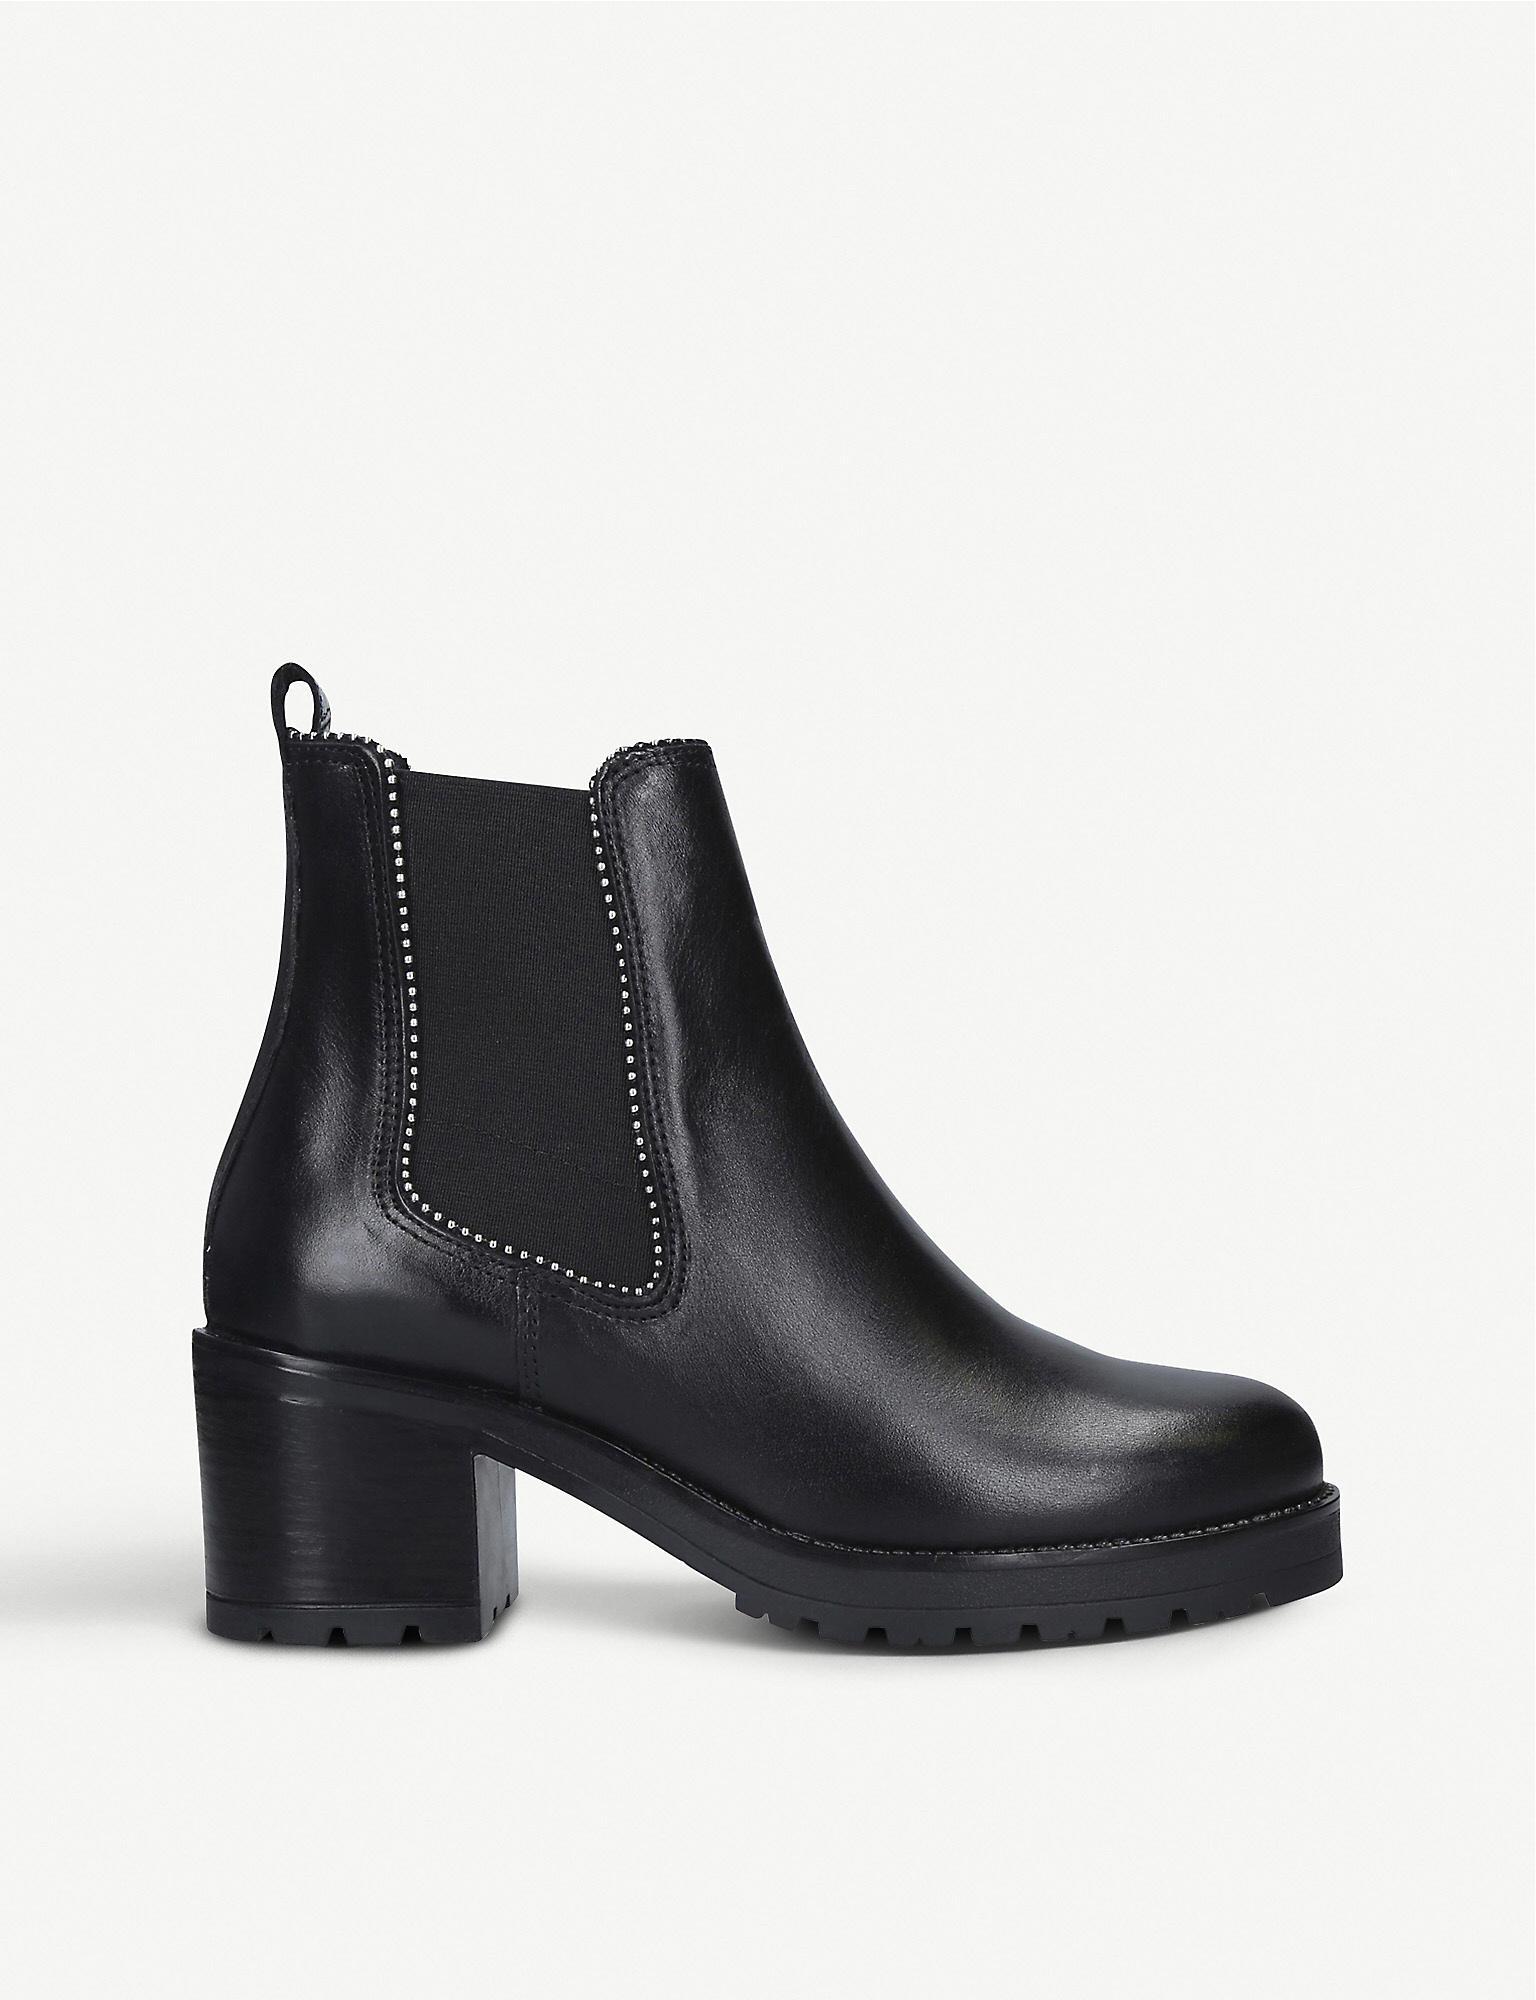 Carvela Kurt Geiger Thrill Bead-trimmed Leather Chelsea Boots in Black ...